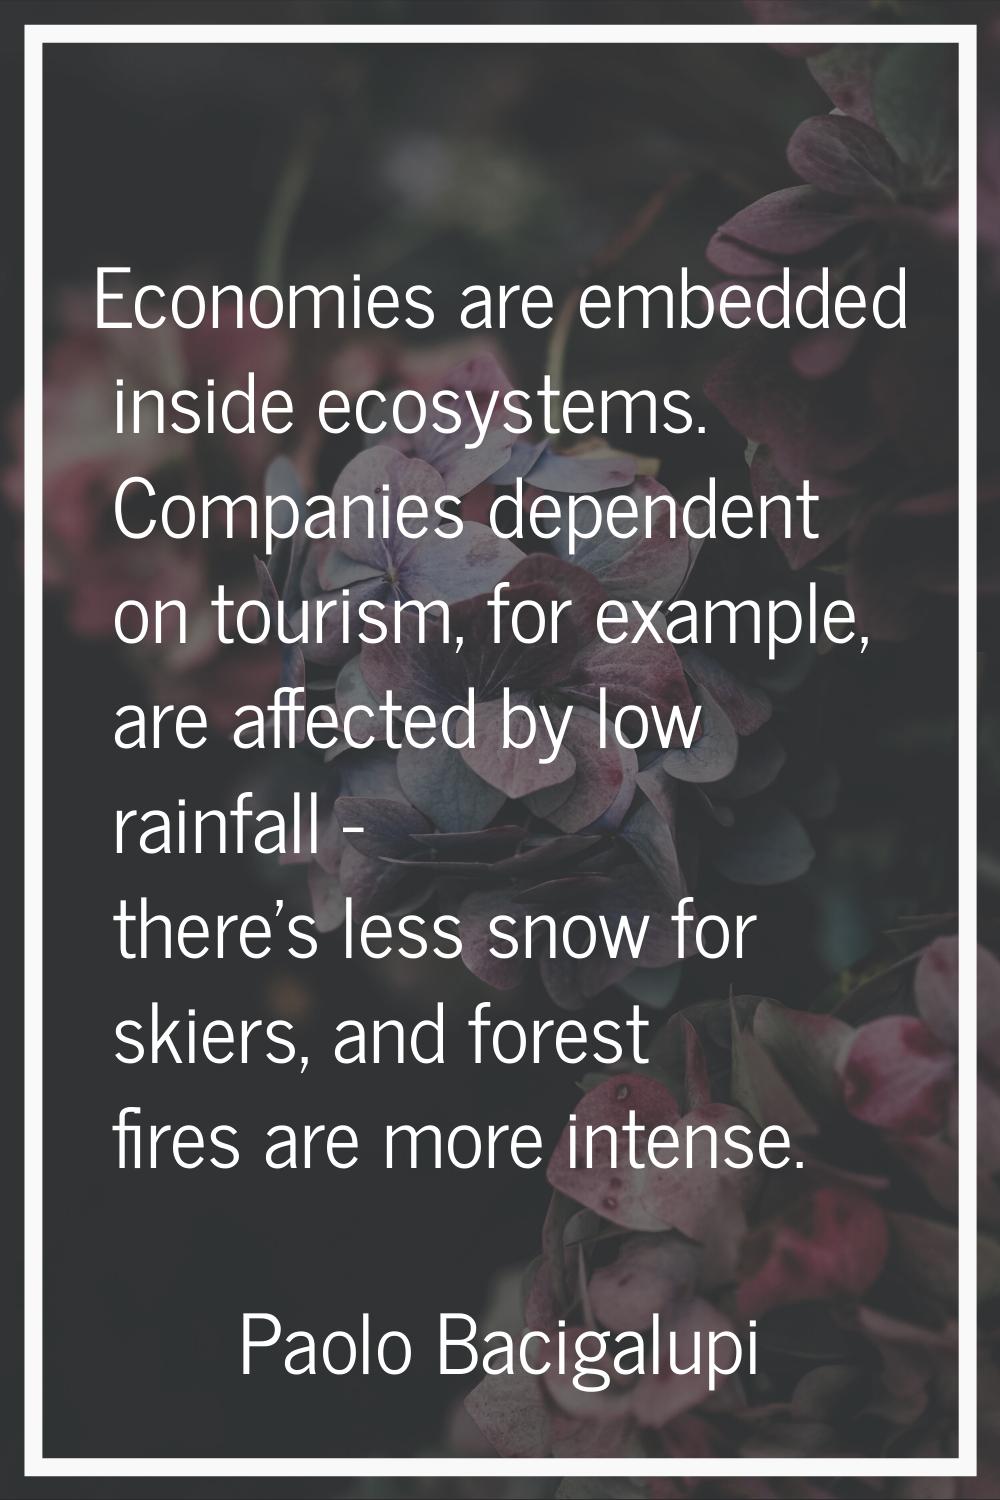 Economies are embedded inside ecosystems. Companies dependent on tourism, for example, are affected